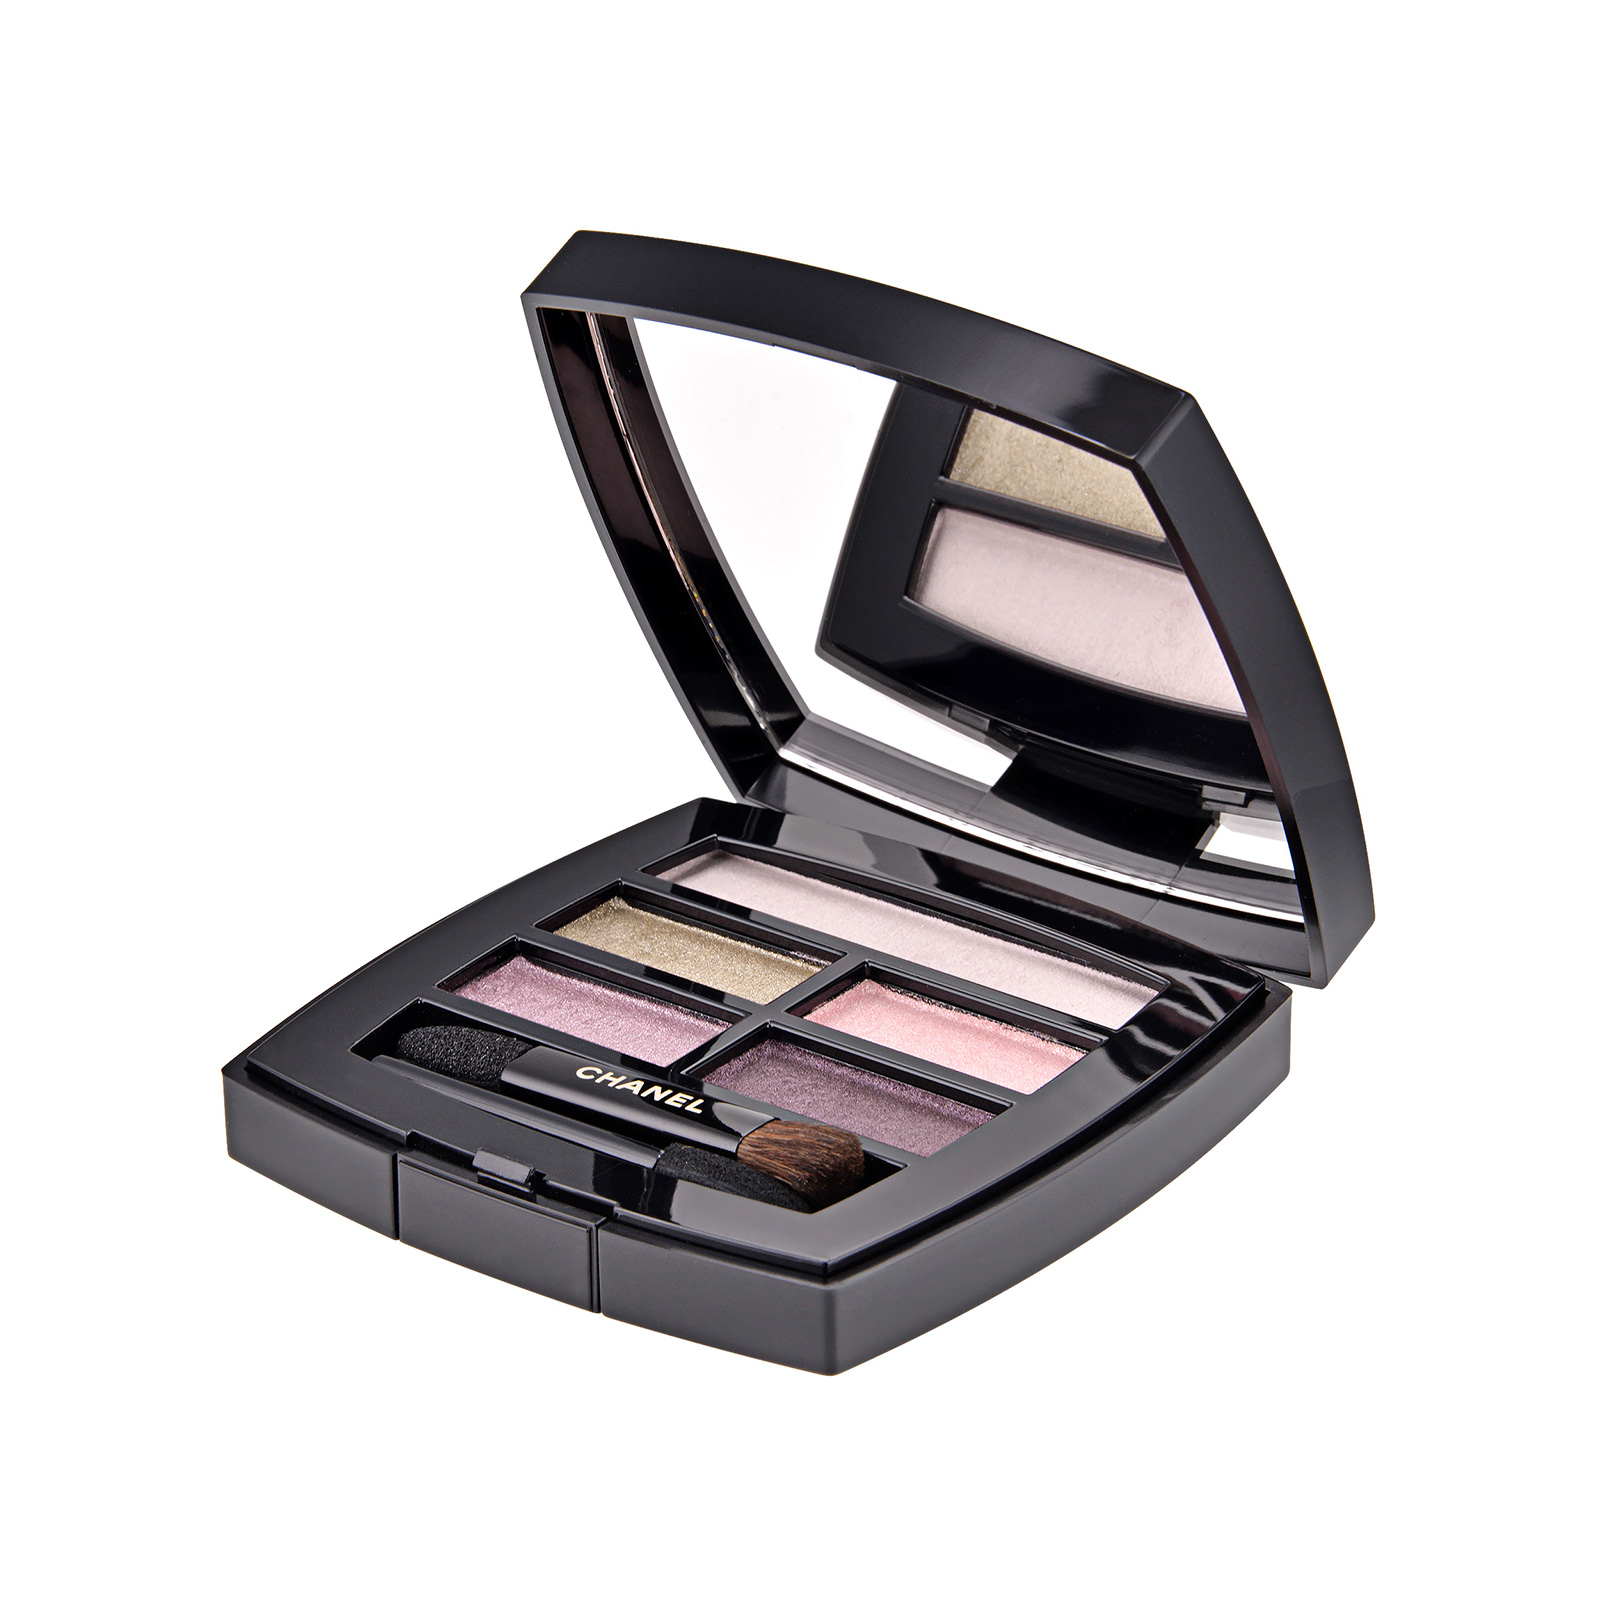 Chanel Dupe the Vibe: Chanel Les Beiges Healthy Glow Natural Eye Shadow  Palette in Warm 